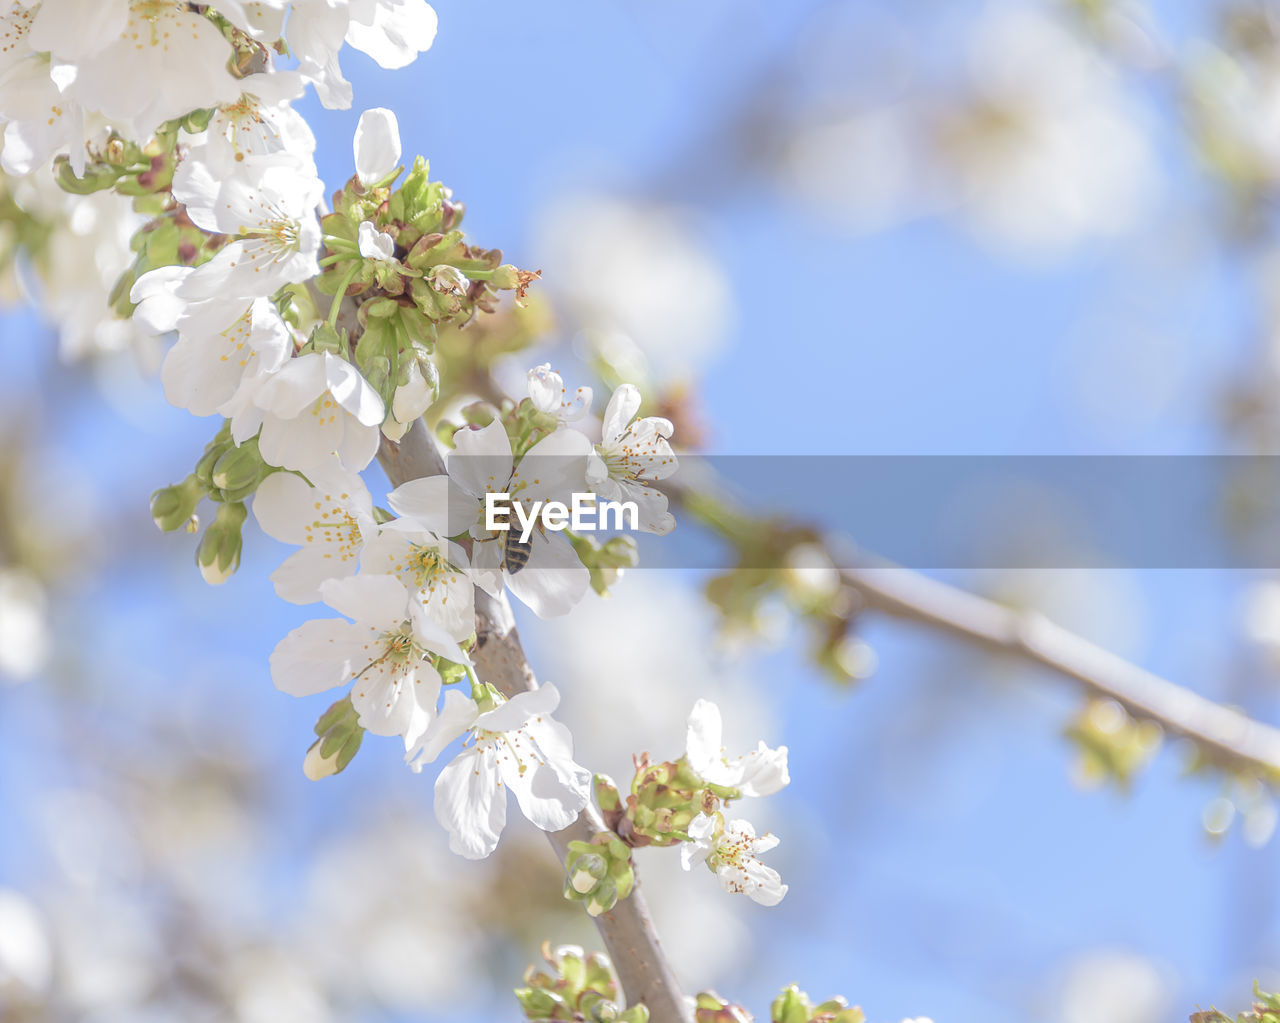 plant, flower, flowering plant, tree, blossom, springtime, freshness, beauty in nature, nature, fragility, growth, branch, spring, produce, close-up, no people, food, macro photography, twig, outdoors, sky, cherry blossom, focus on foreground, white, flower head, selective focus, inflorescence, day, food and drink, blue, sunlight, botany, fruit tree, defocused, petal, low angle view, tranquility, fruit, agriculture, apple tree, backgrounds, cherry tree